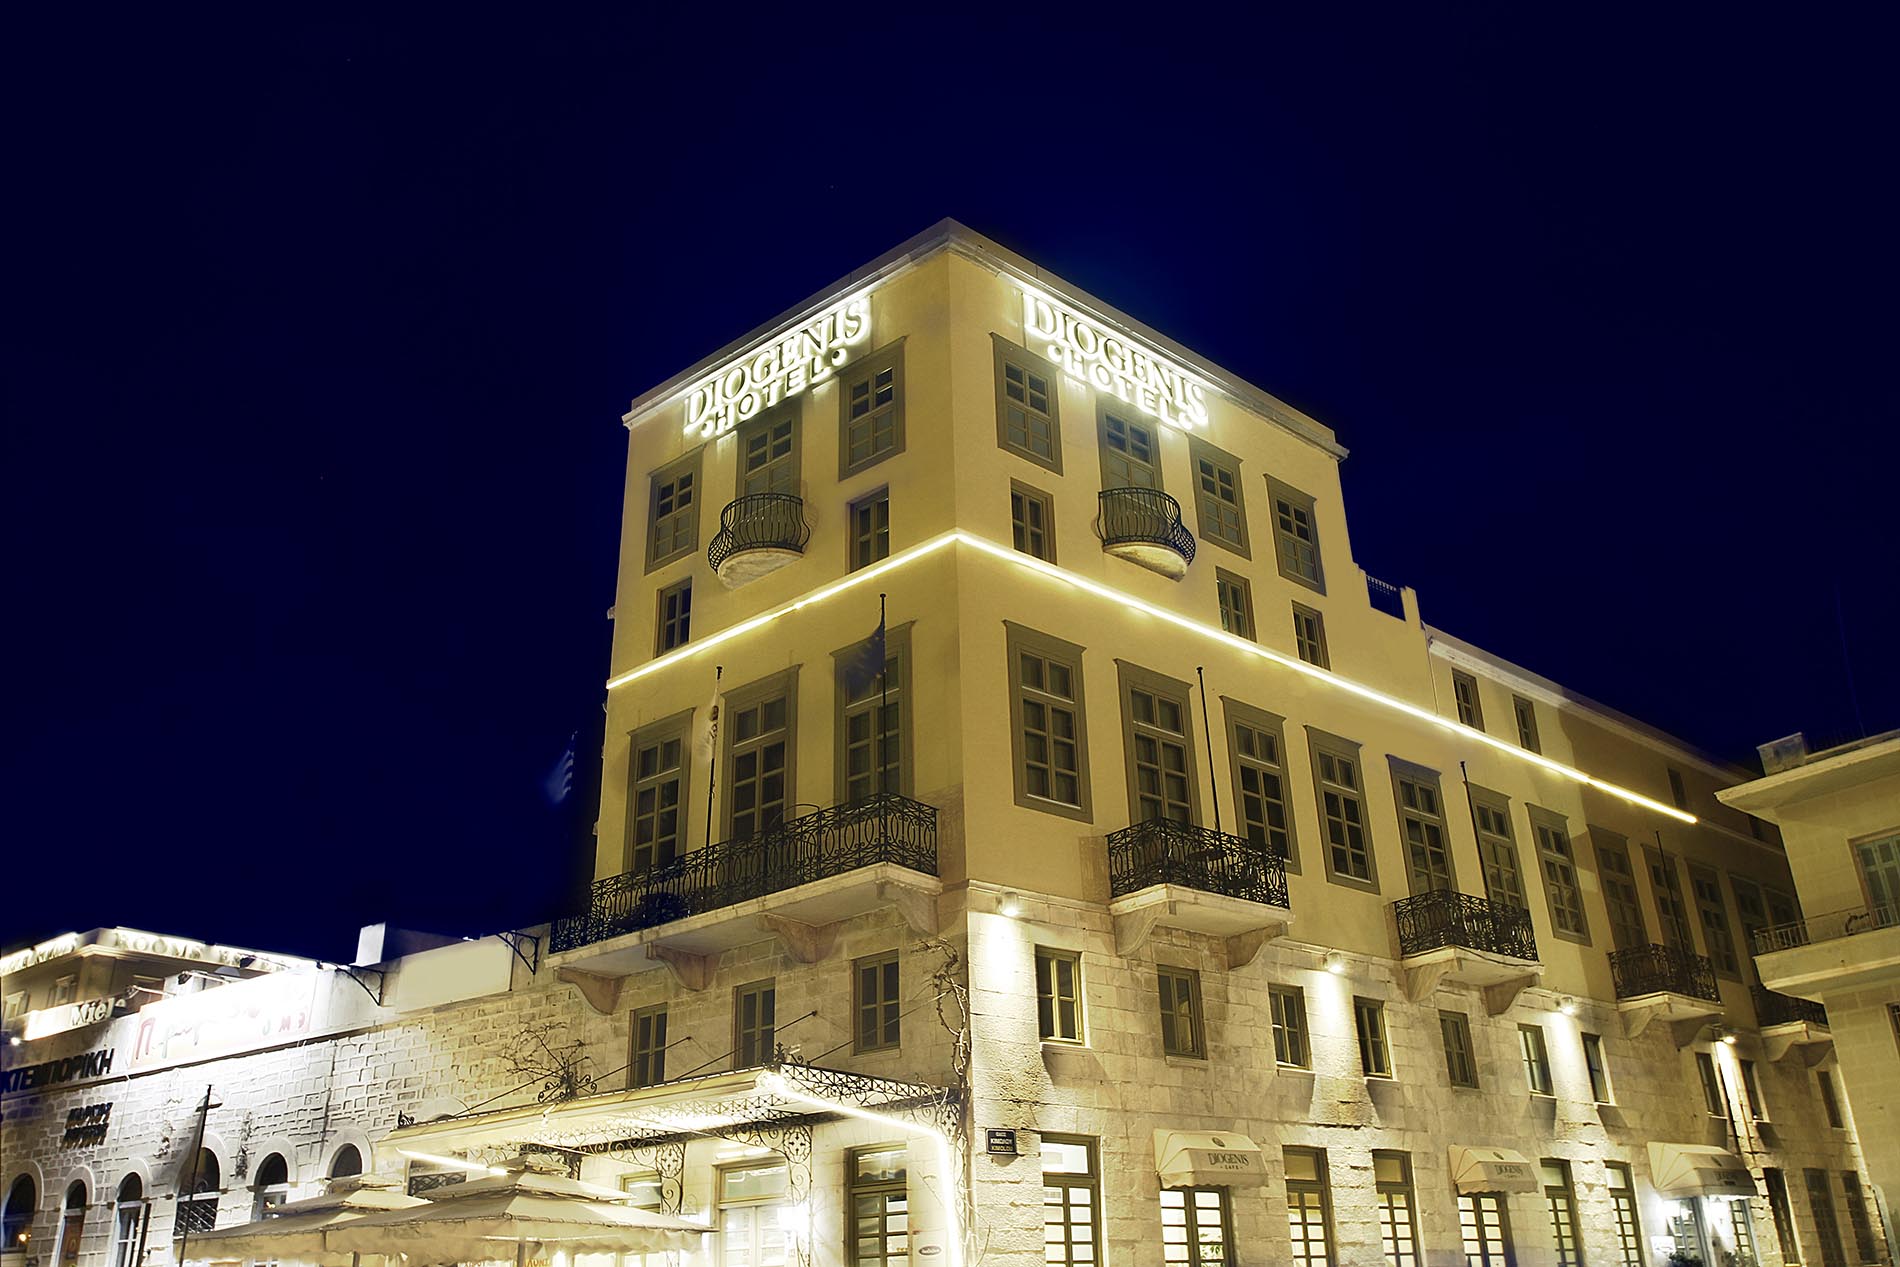 DIOGENIS HOTEL